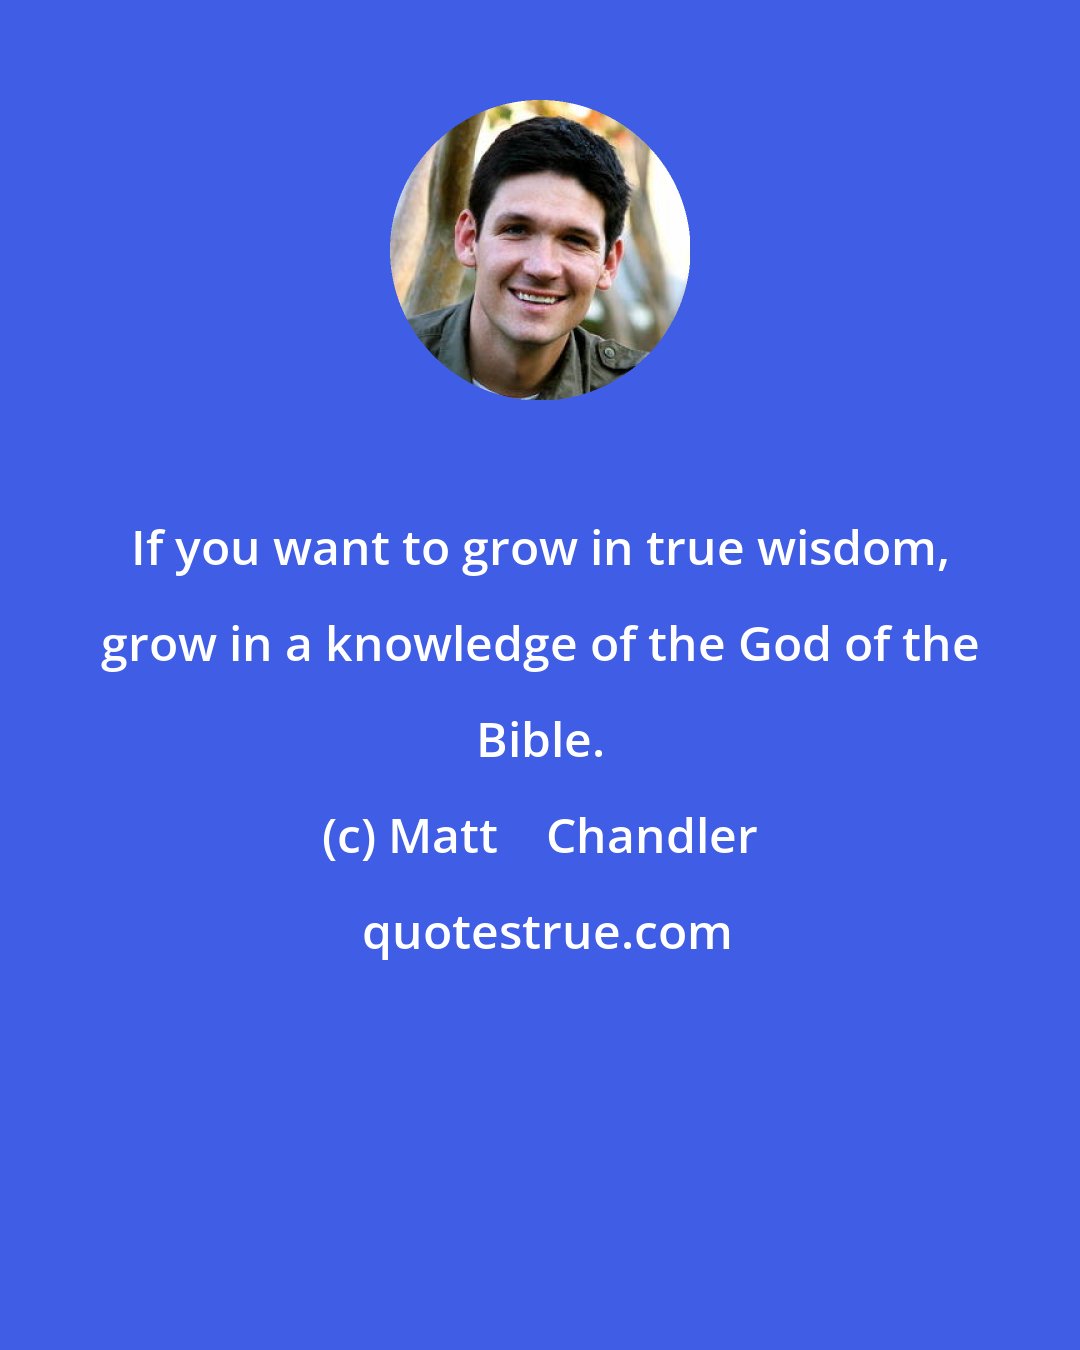 Matt    Chandler: If you want to grow in true wisdom, grow in a knowledge of the God of the Bible.